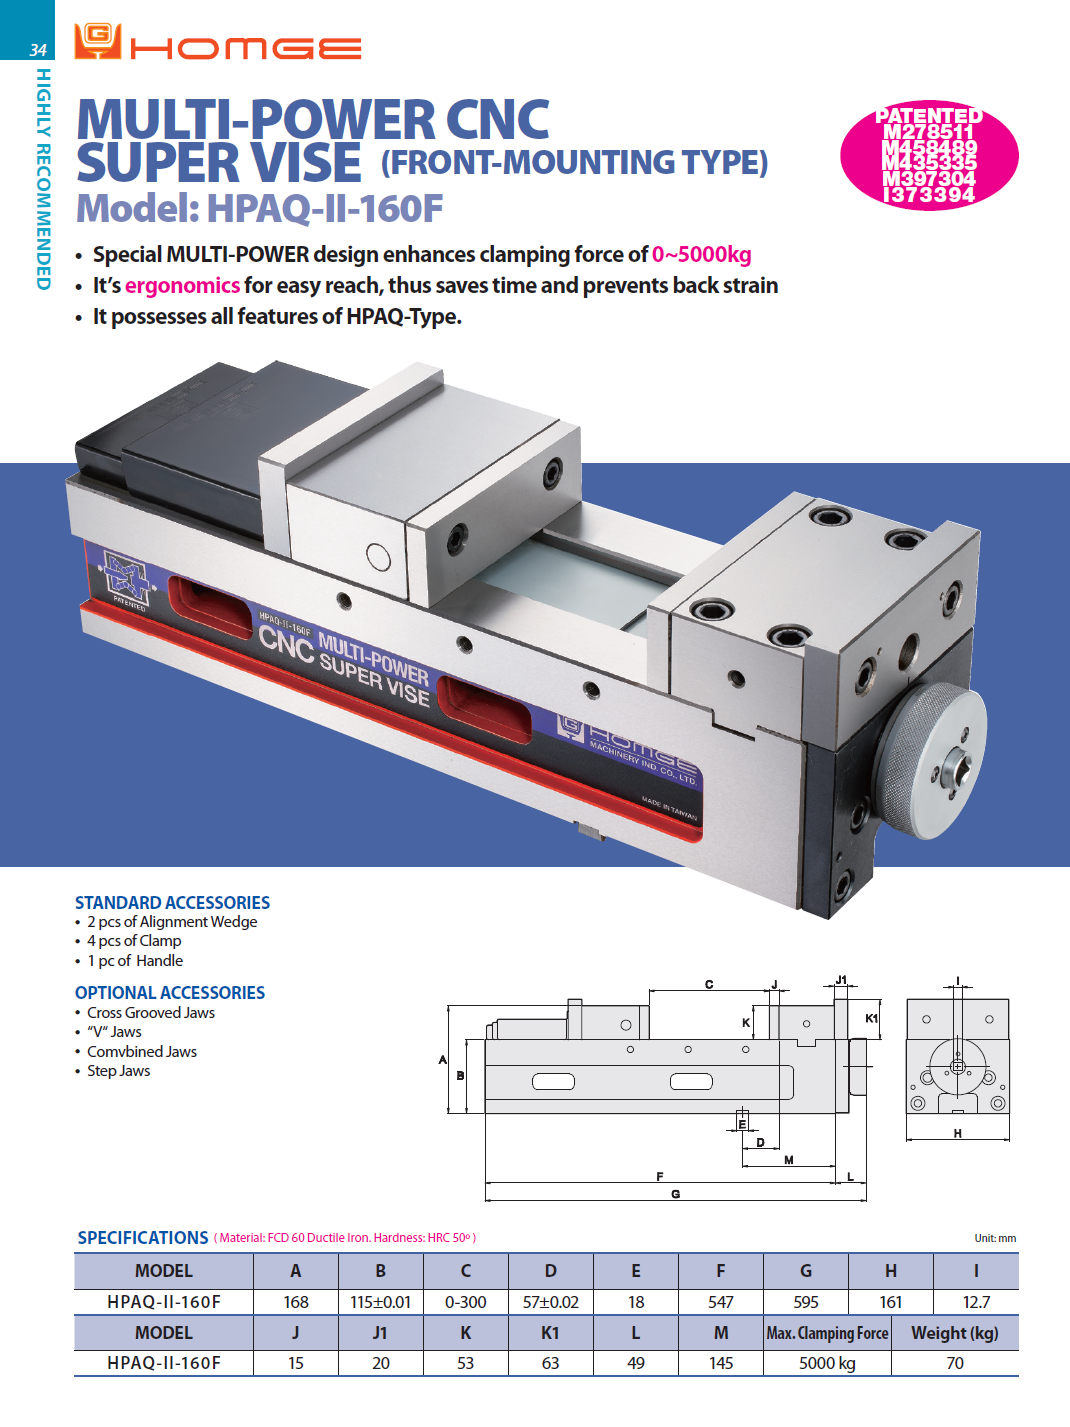 Catalog|MULTI-POWER CNC SUPER VISE (FRONT-MOUNTING TYPE)